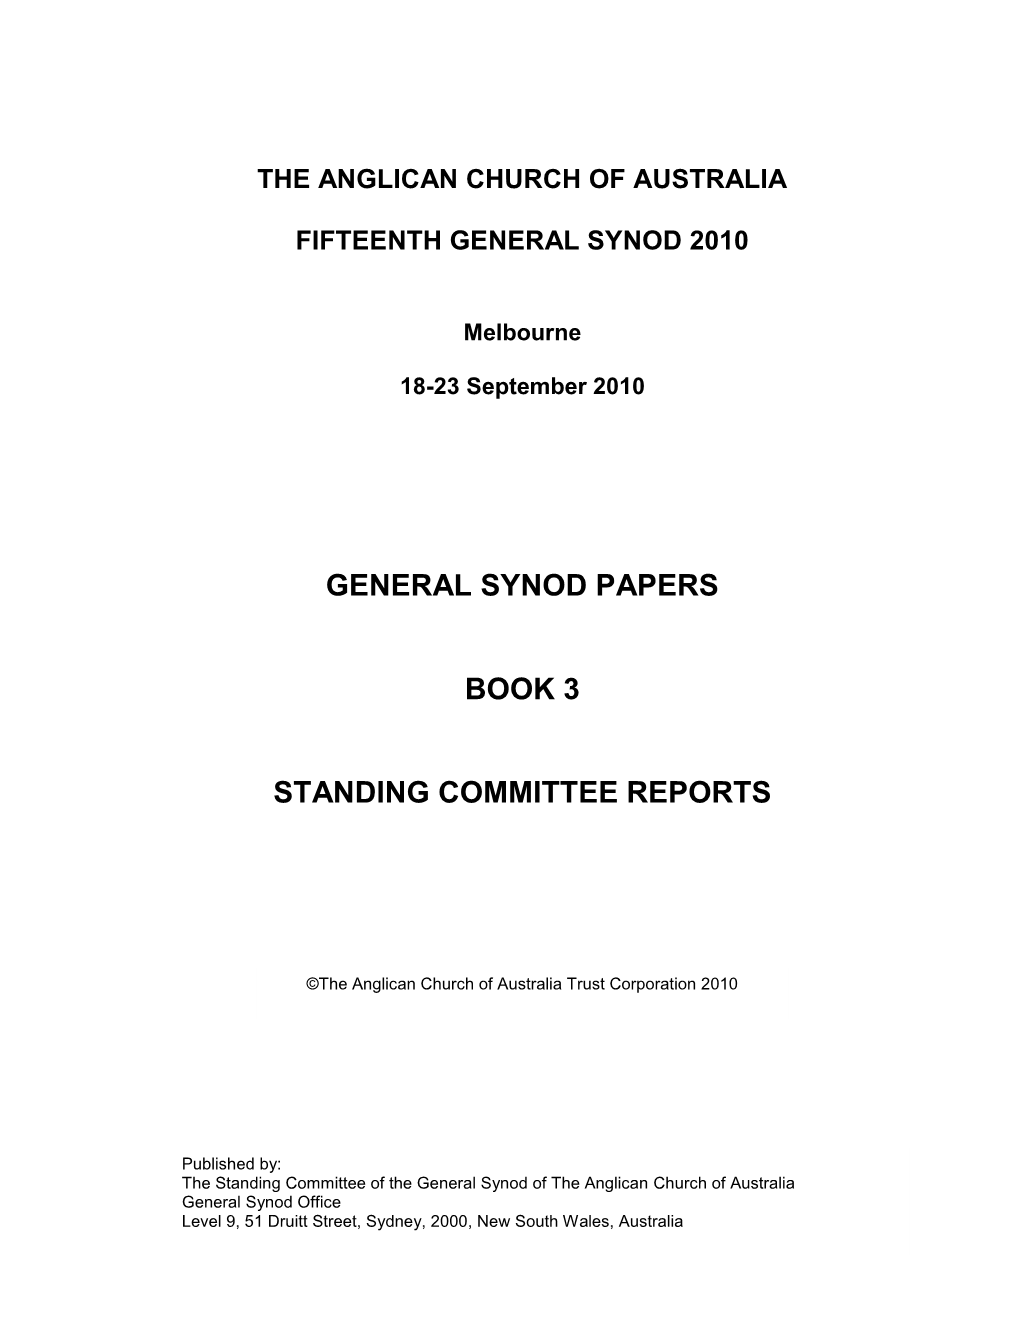 Standing Committee Reports